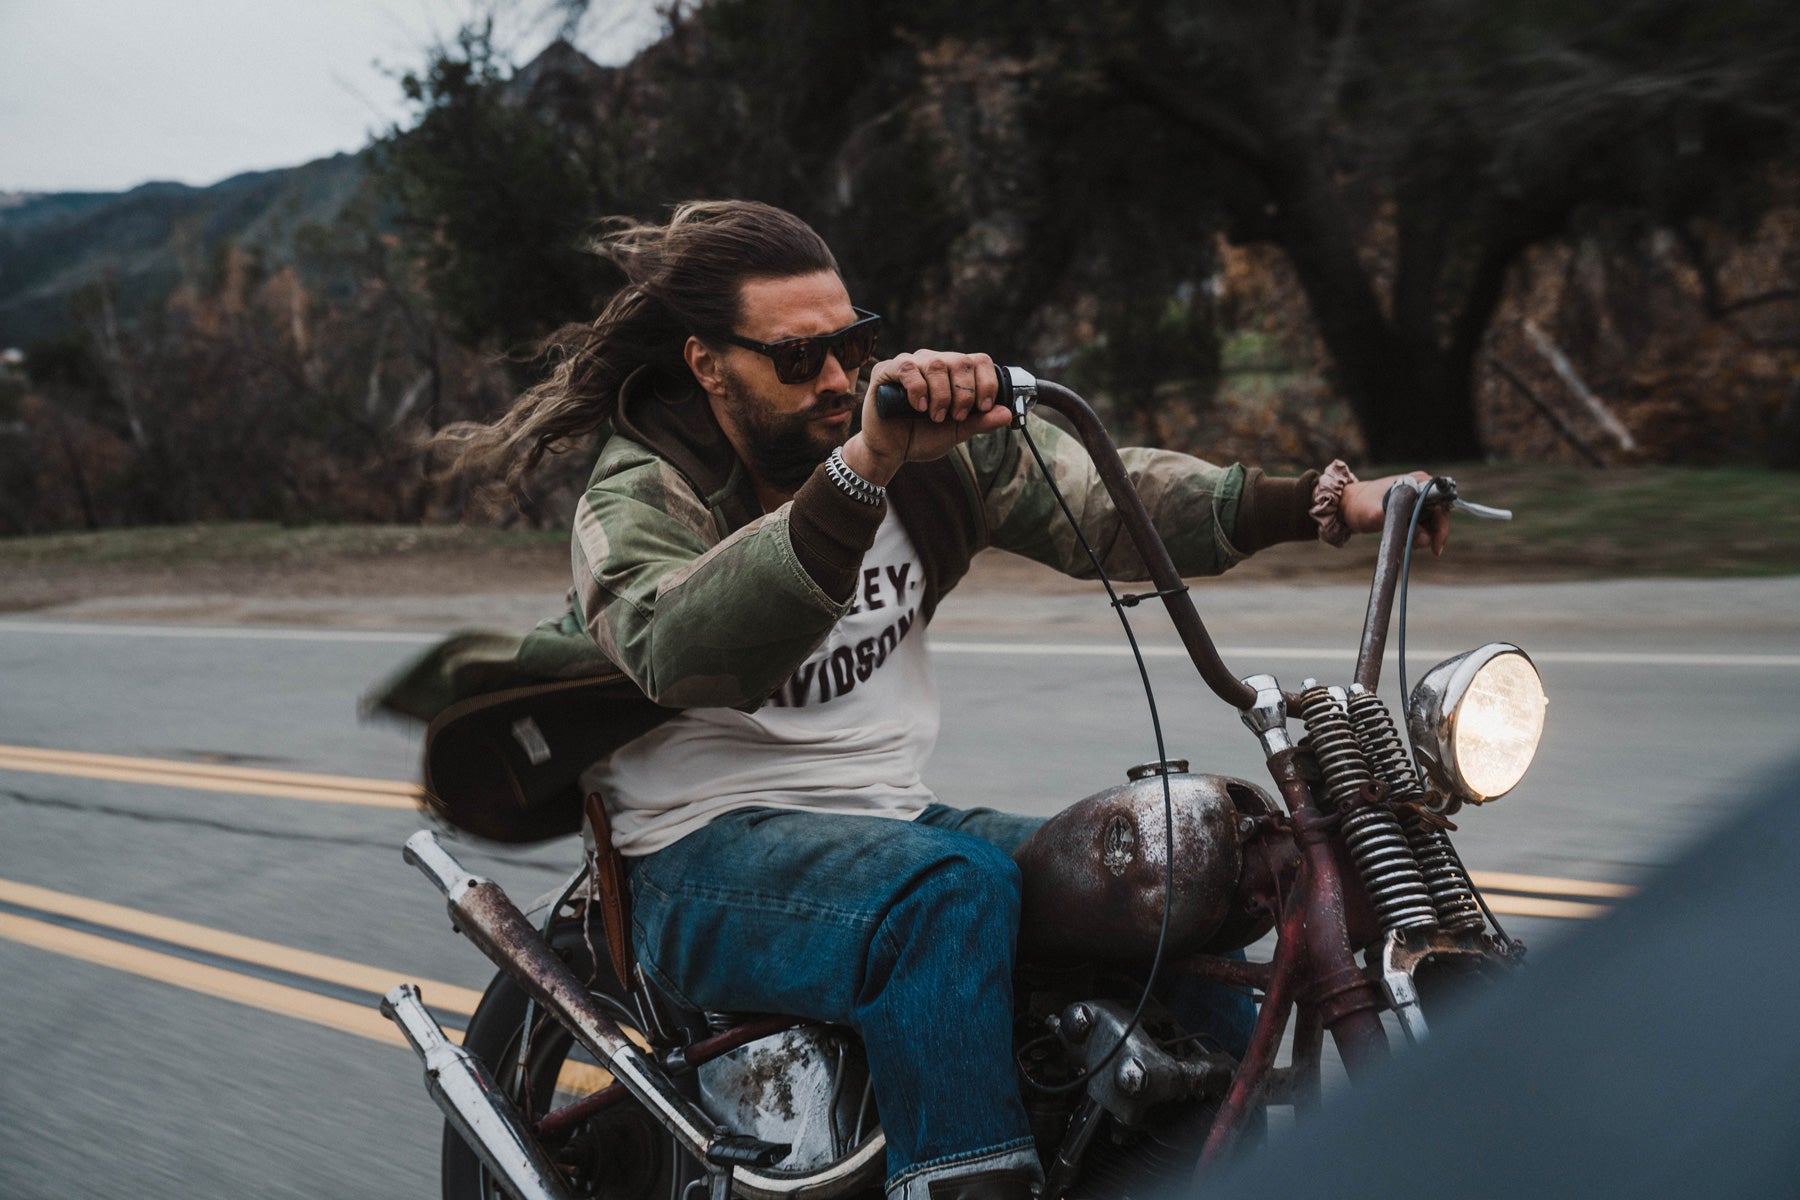 Jason momoa is shown in the matte rose tort electic sunglasses whilst riding a motorcycle